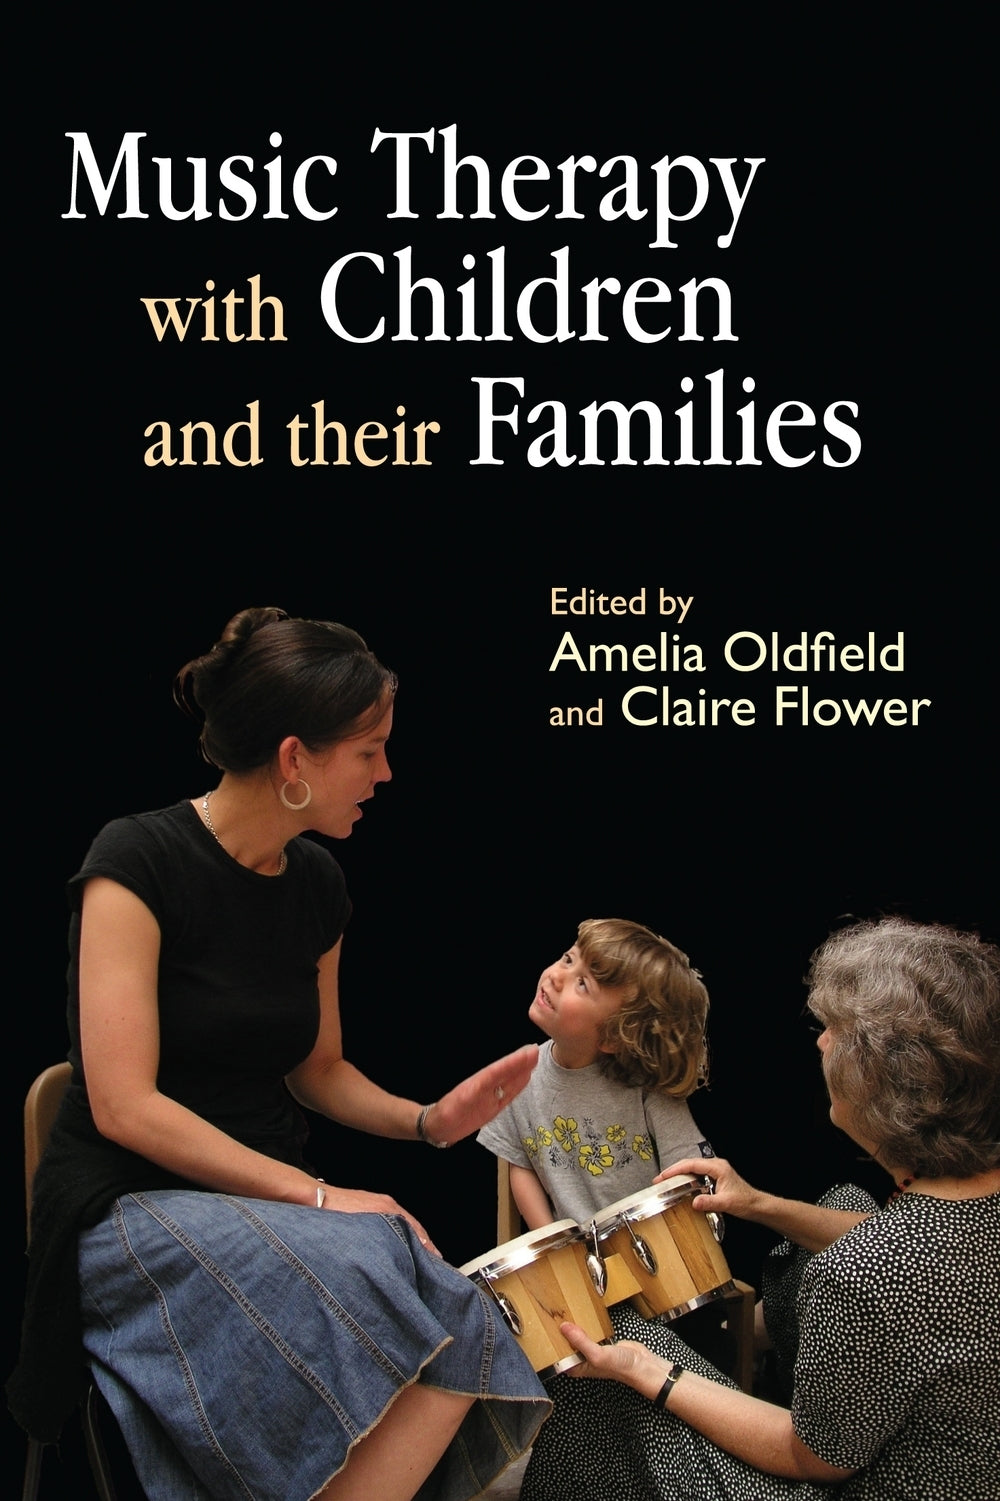 Music Therapy with Children and their Families by Claire Flower, Amelia Oldfield